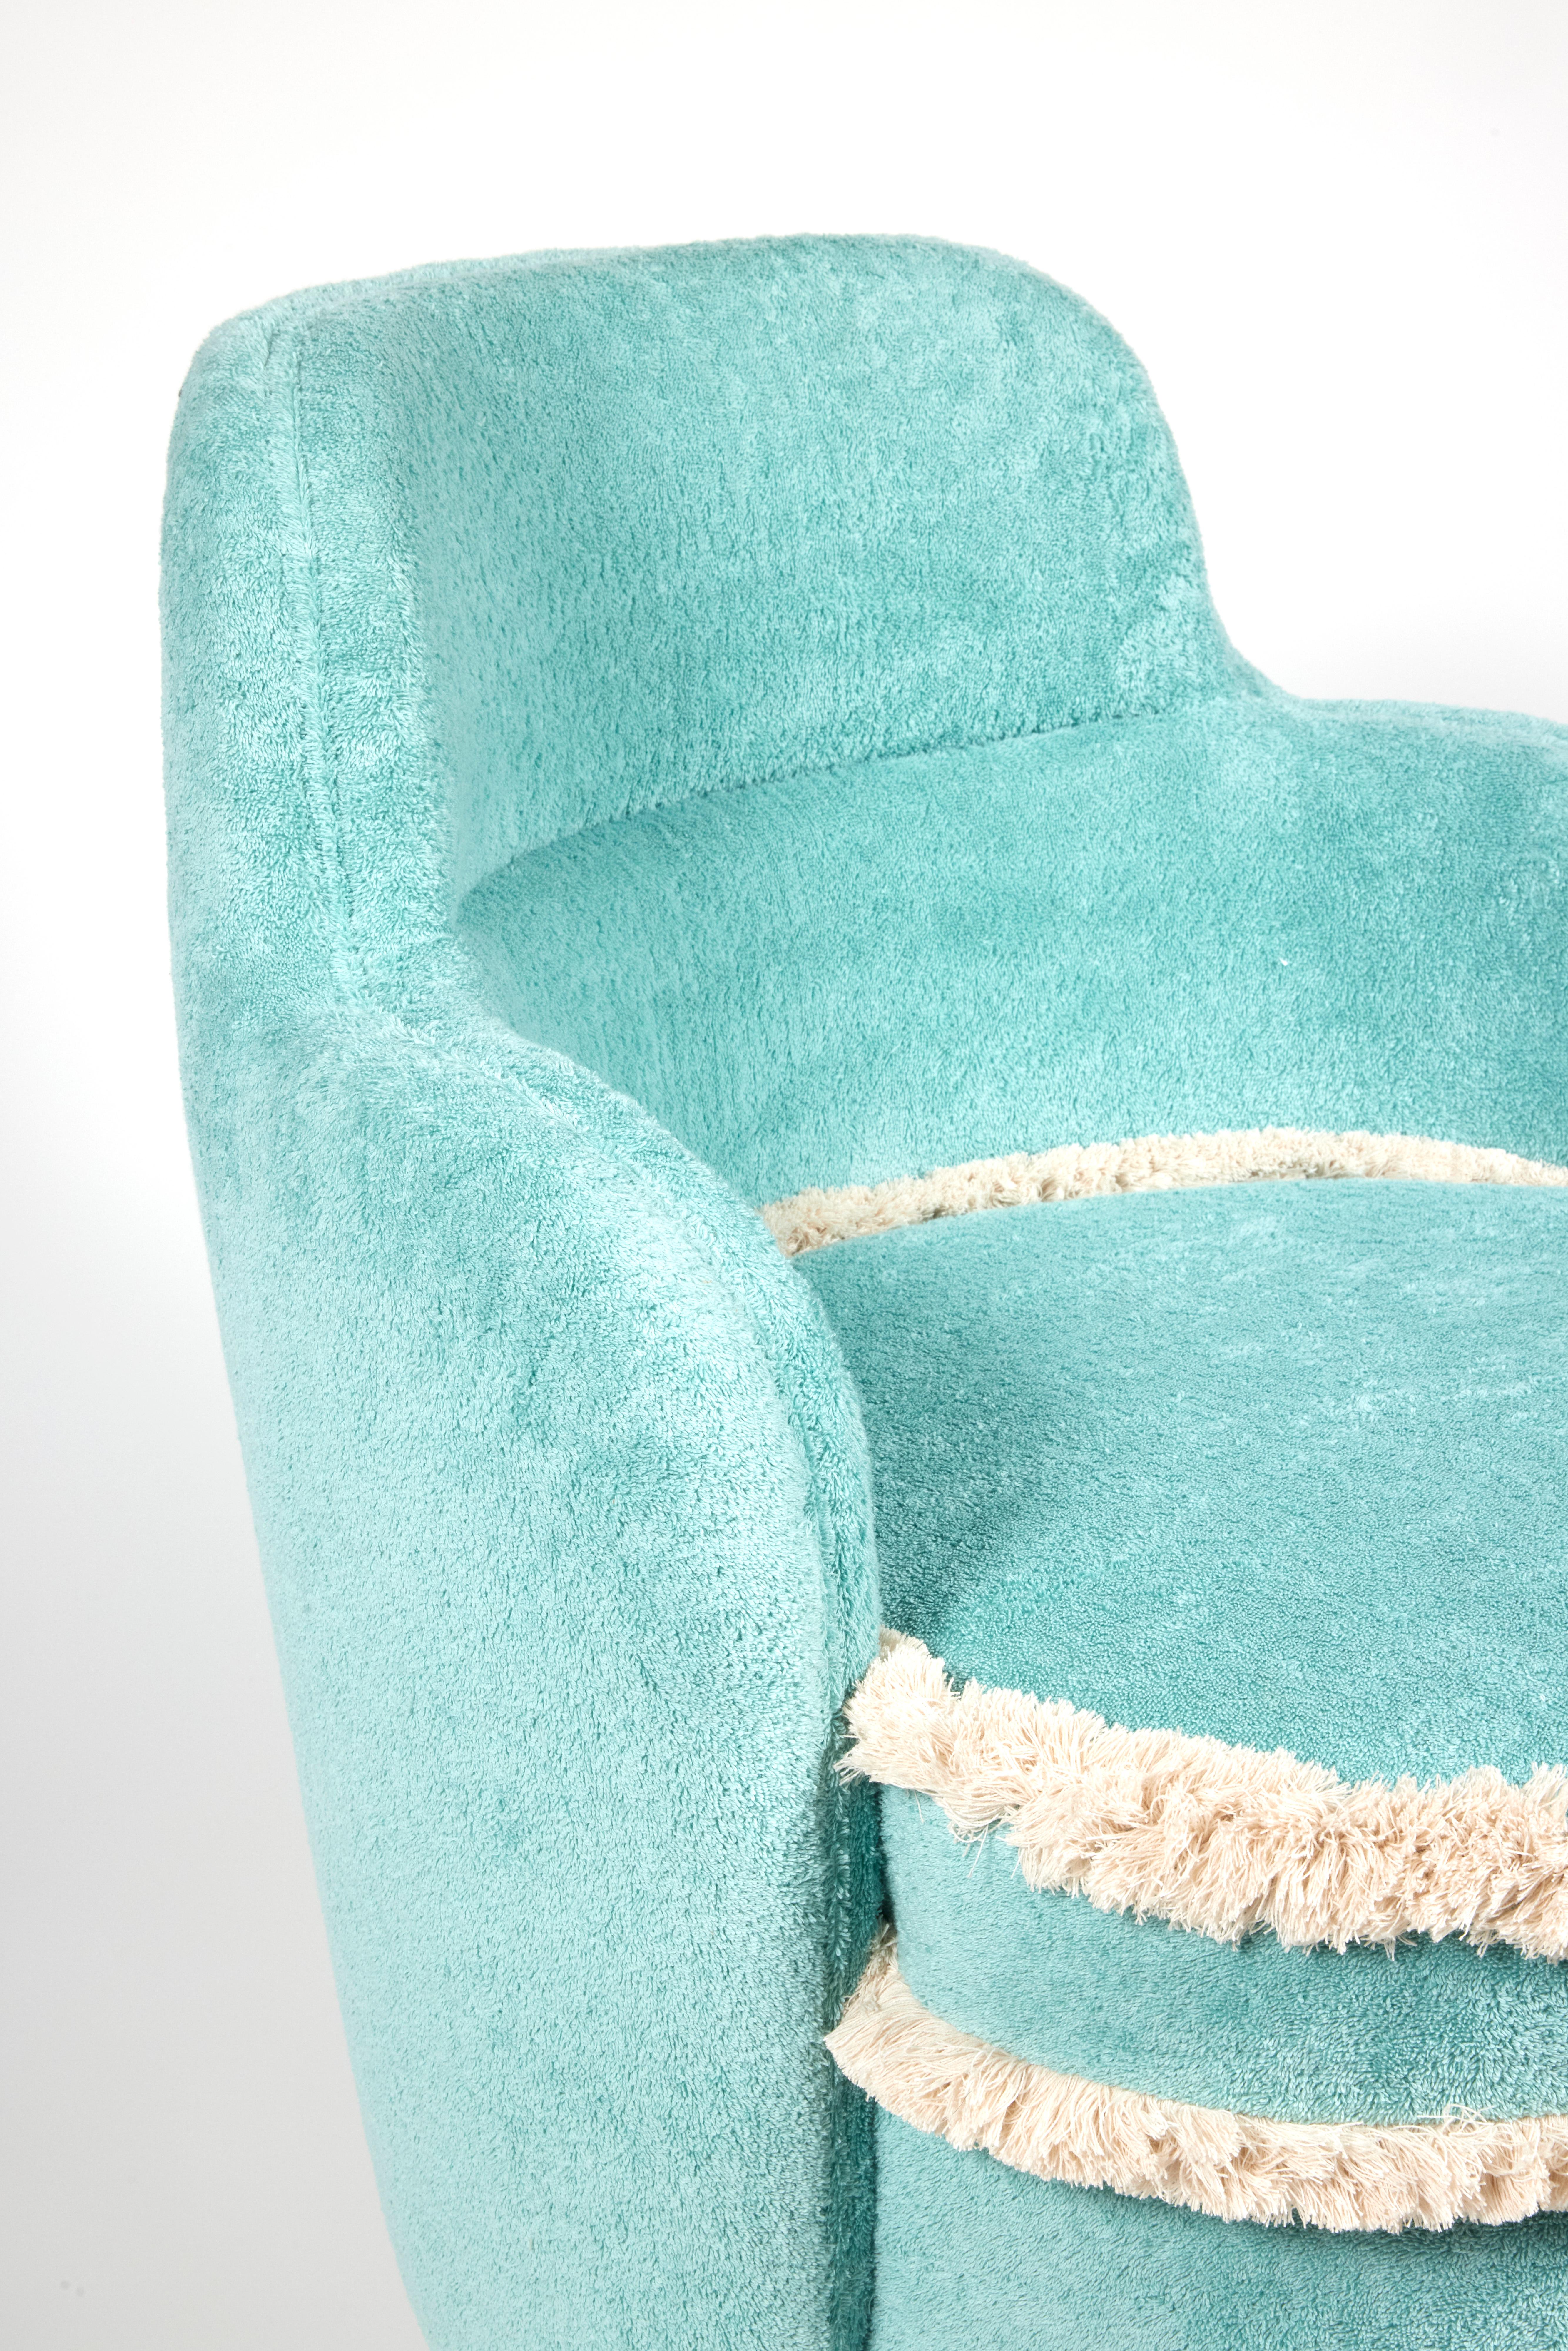 Modern Baba Armchair Designed By Chloé Nègre For Sale